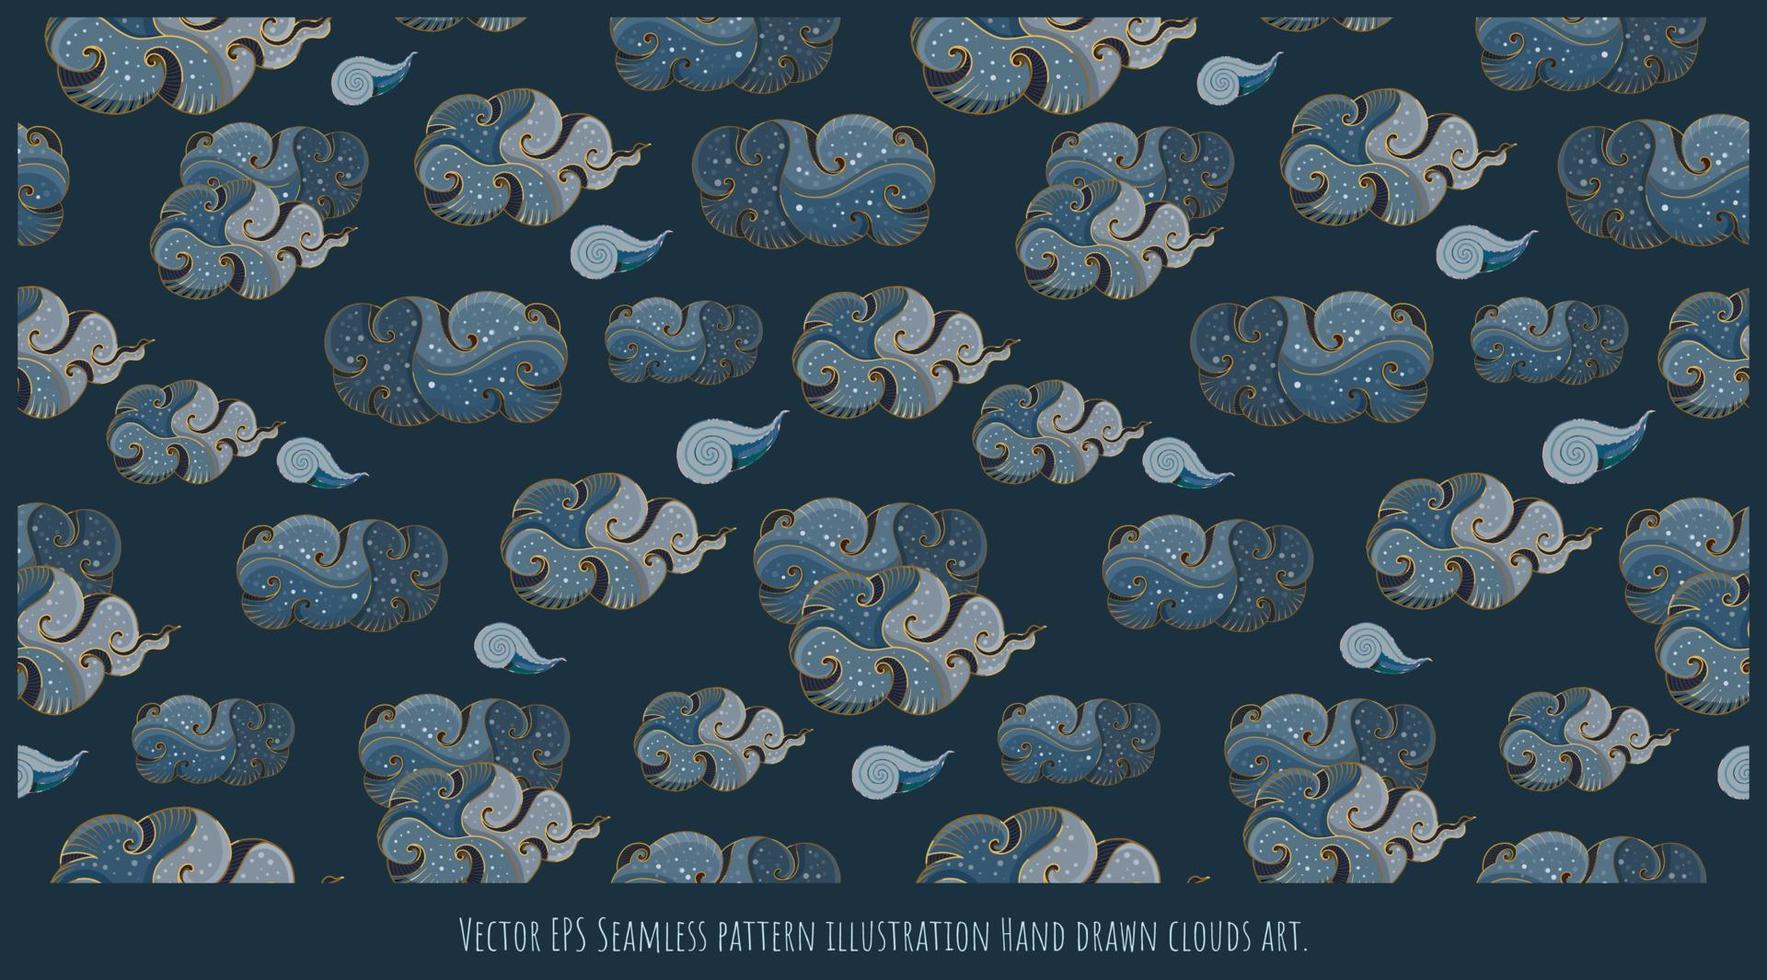 Vector EPS Seamless pattern illustration Hand drawn clouds art